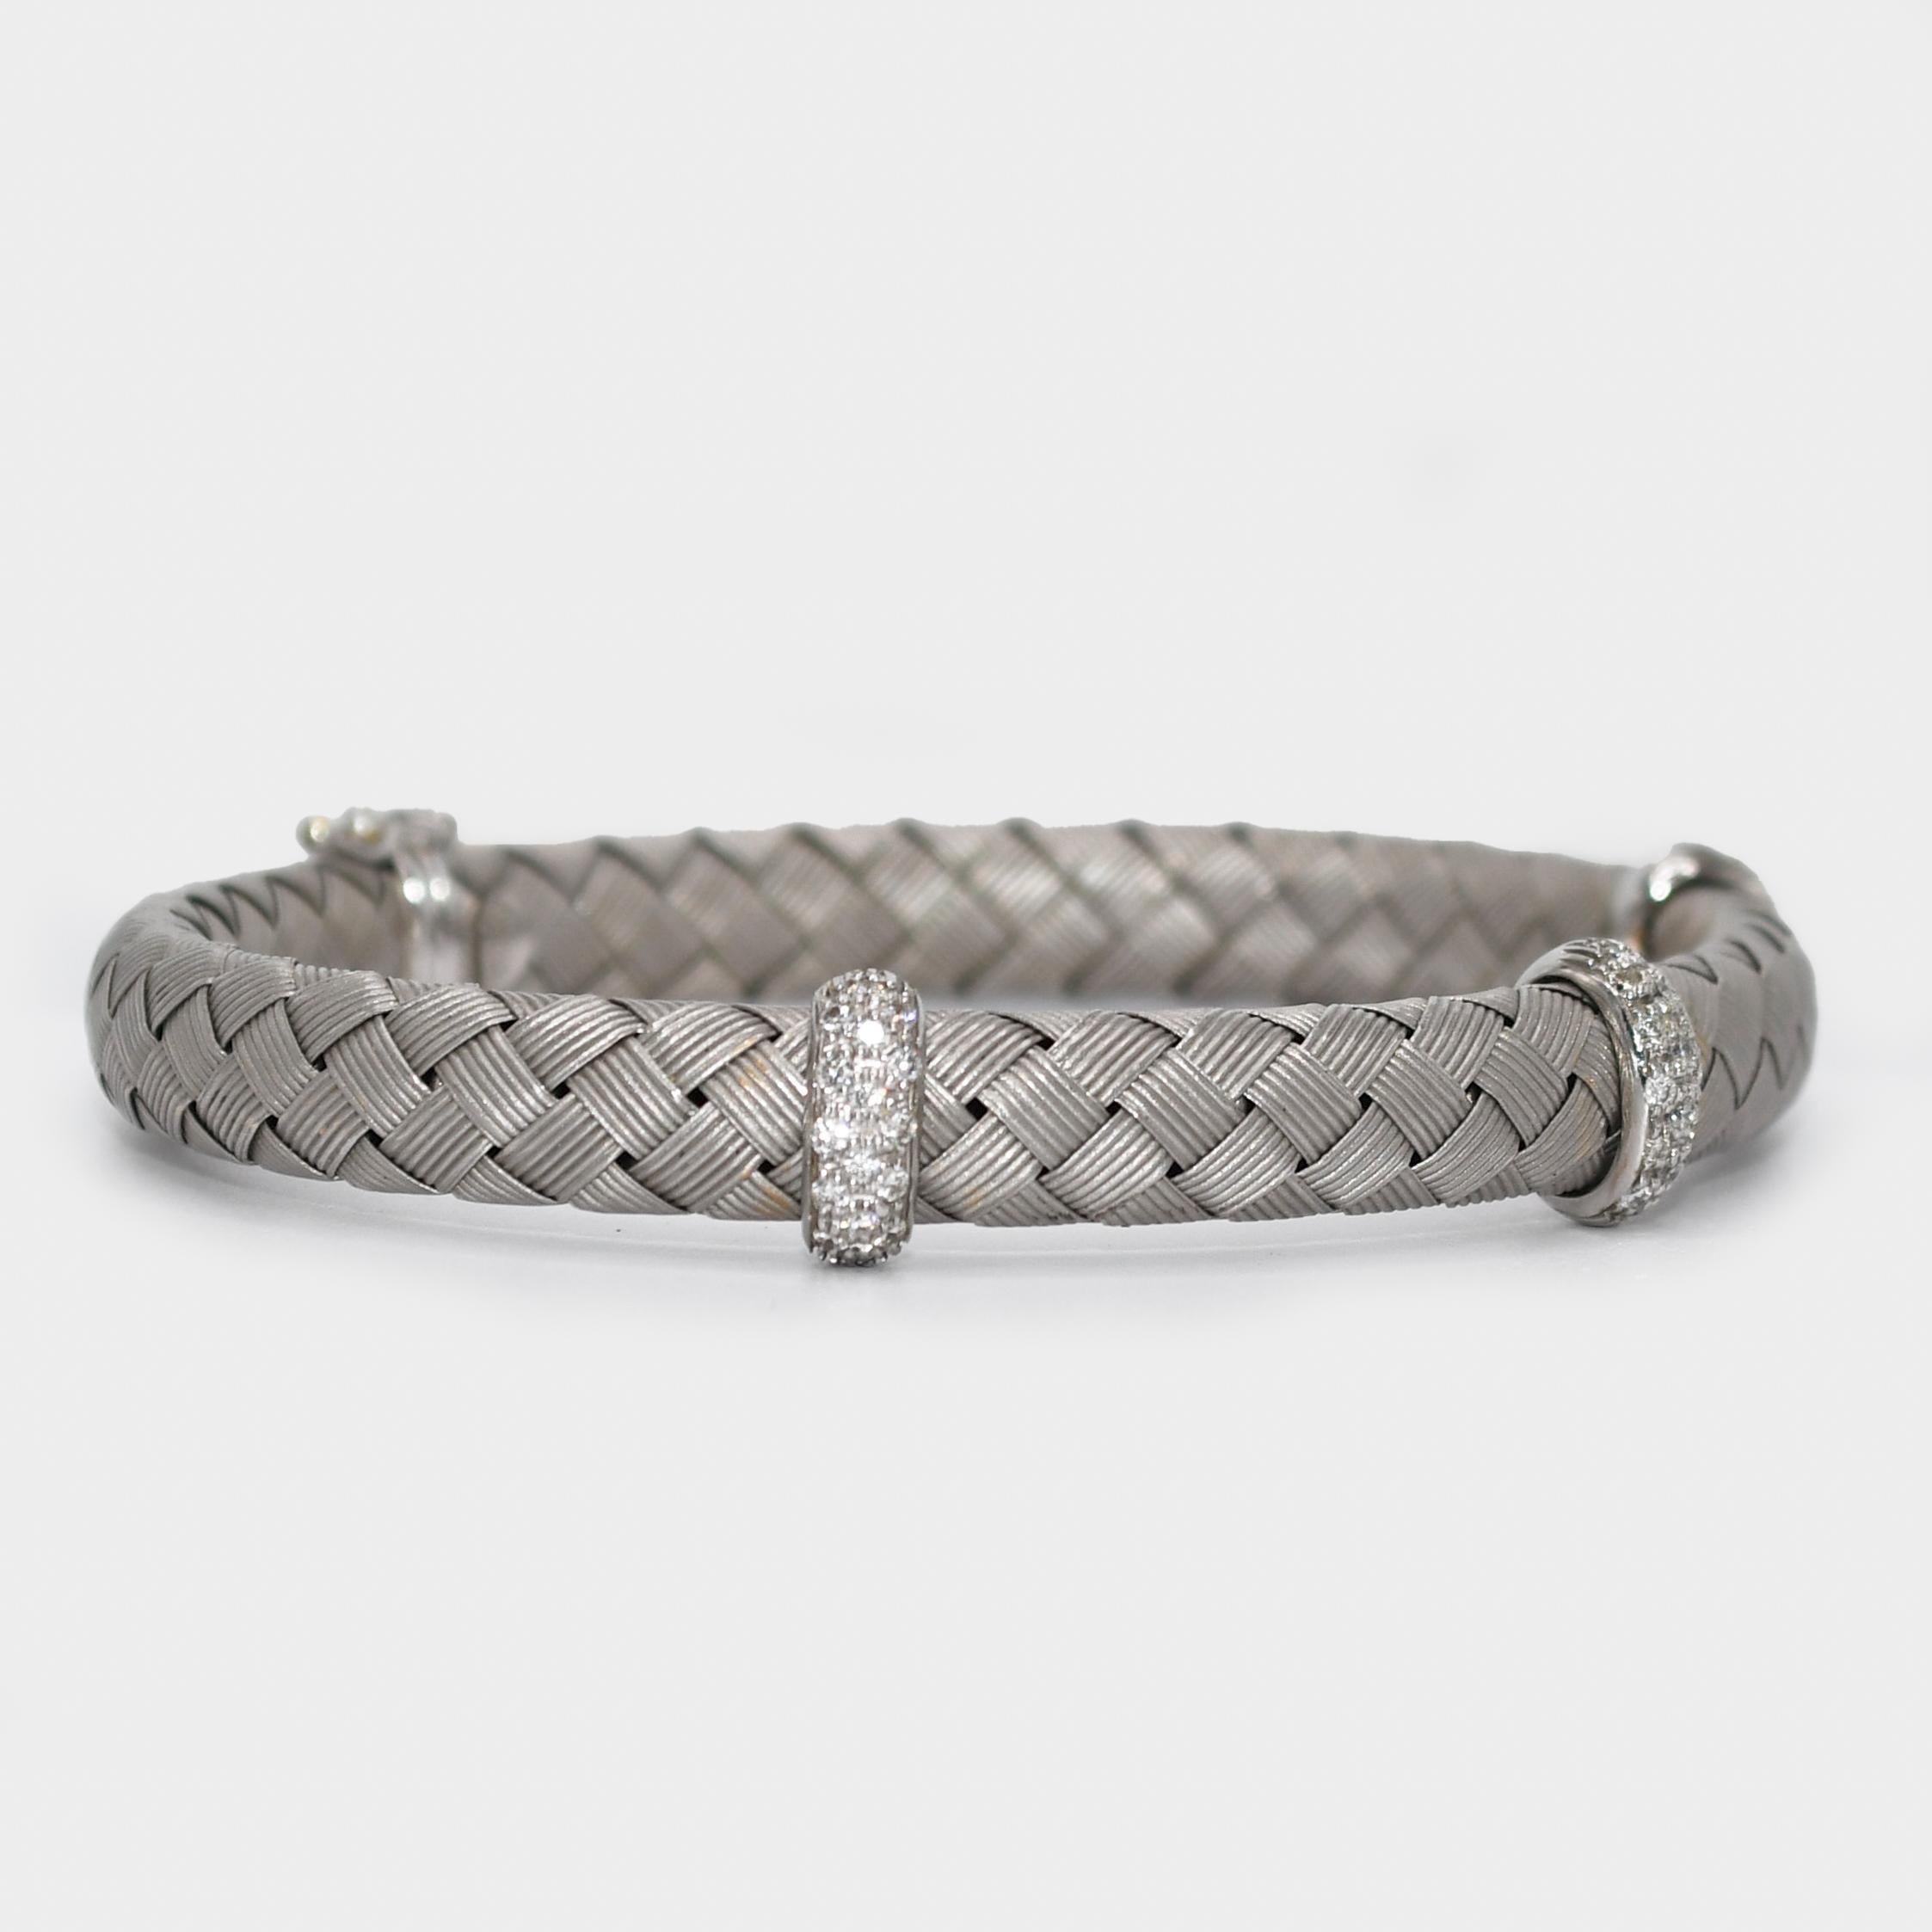 18K White Gold Woven Bracelet with Diamonds and Clasps 26.4g
18k white gold woven link bangle bracelet with diamonds.
Stamped 18k Italy, 1226 VI and weighs 26.4 grams.
The diamonds are round brilliant cuts, approximately .50 total carats, G to H